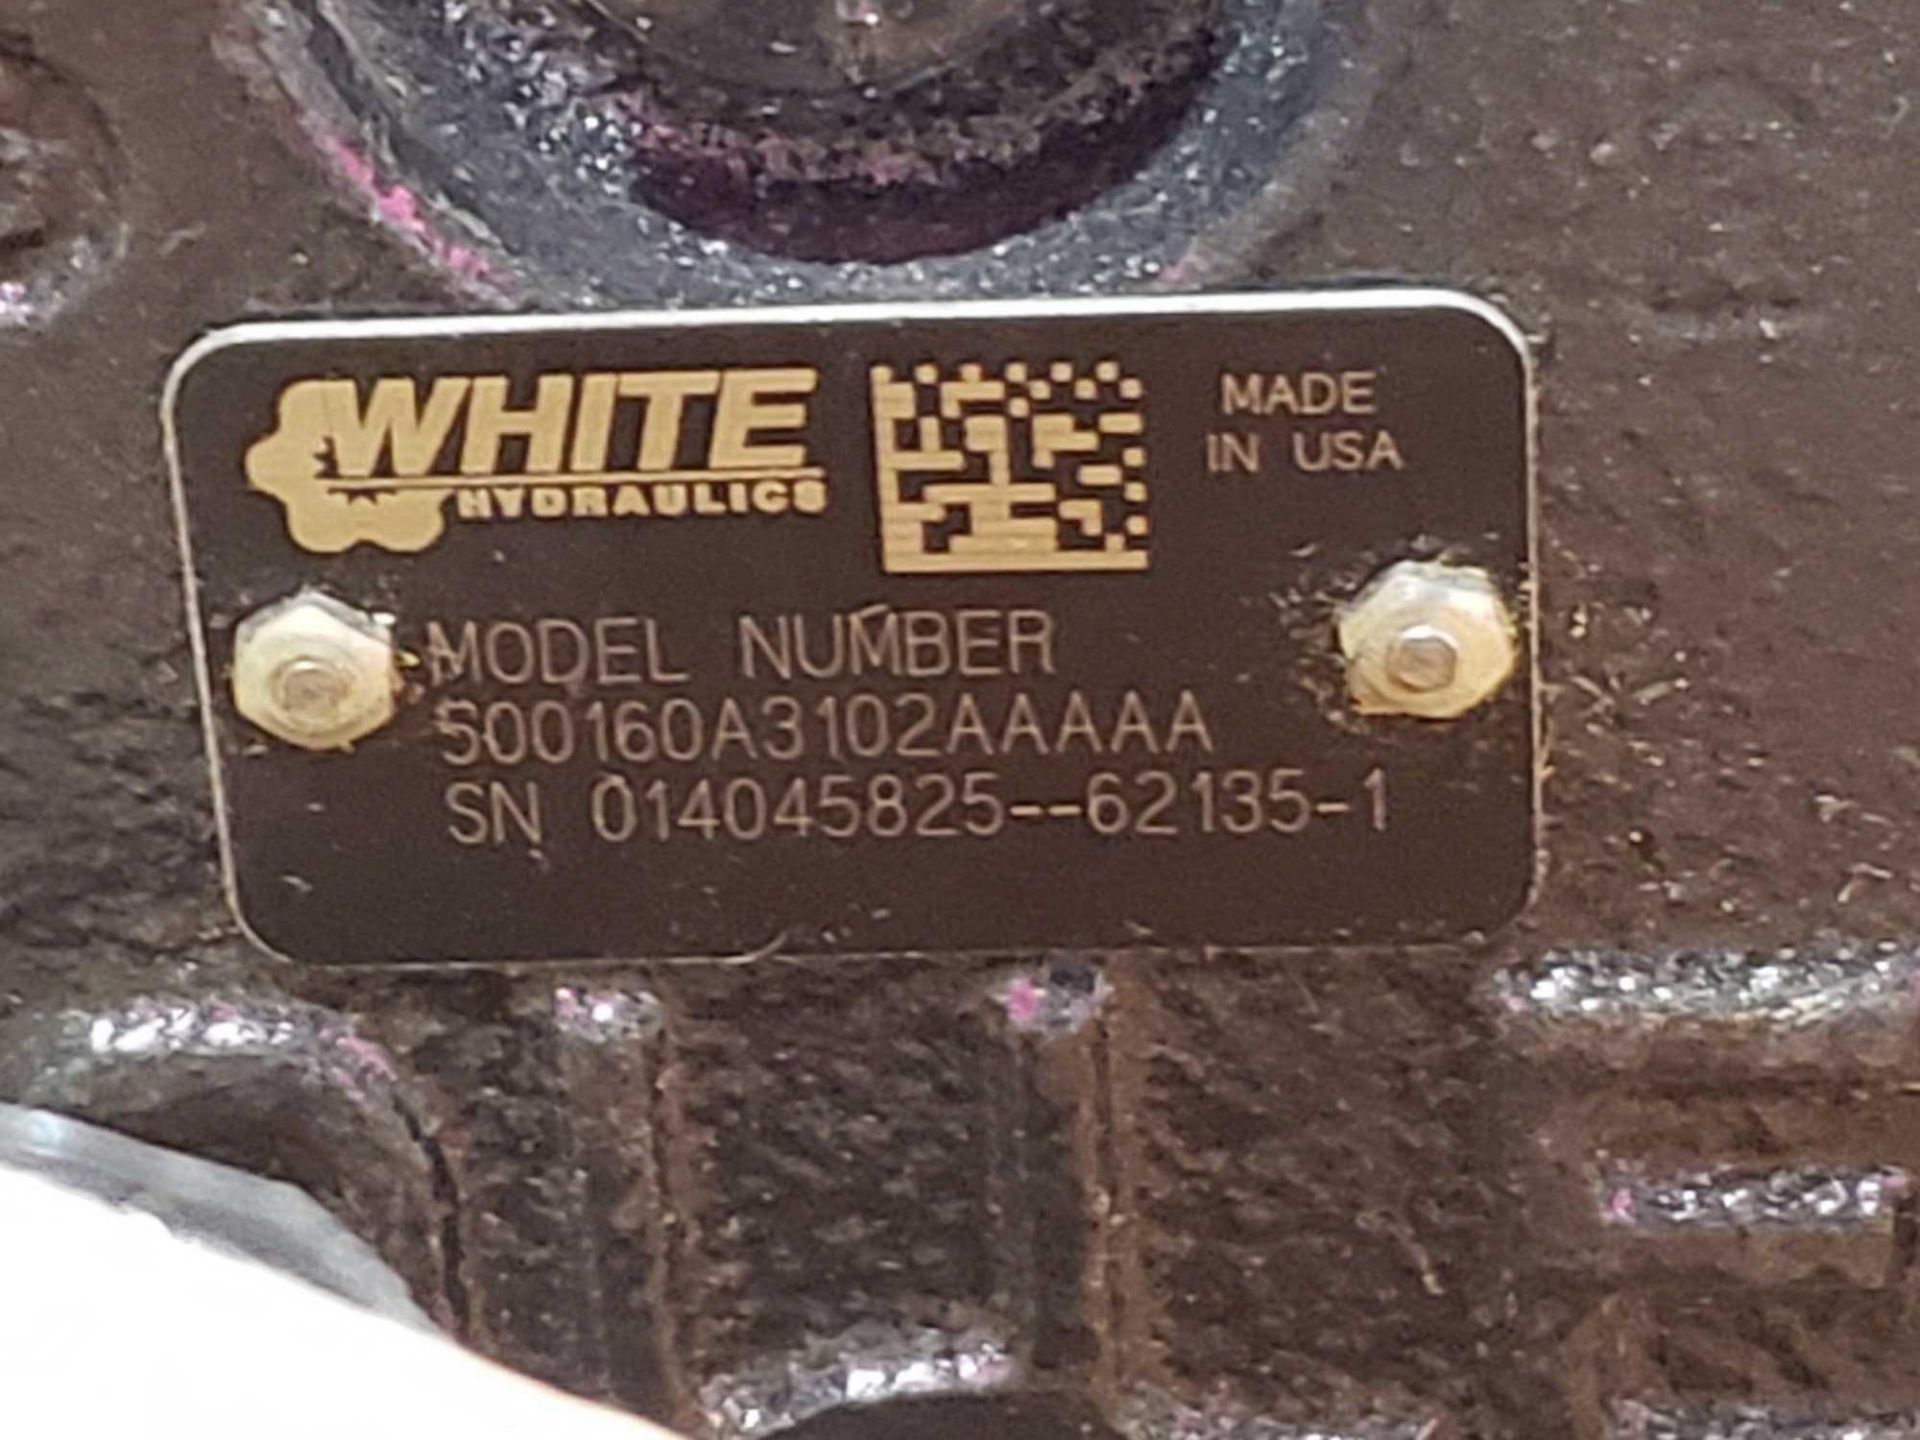 White Hydraulics model S00160A3102AAAAA hydraulic pump. New as pictured. - Image 2 of 3